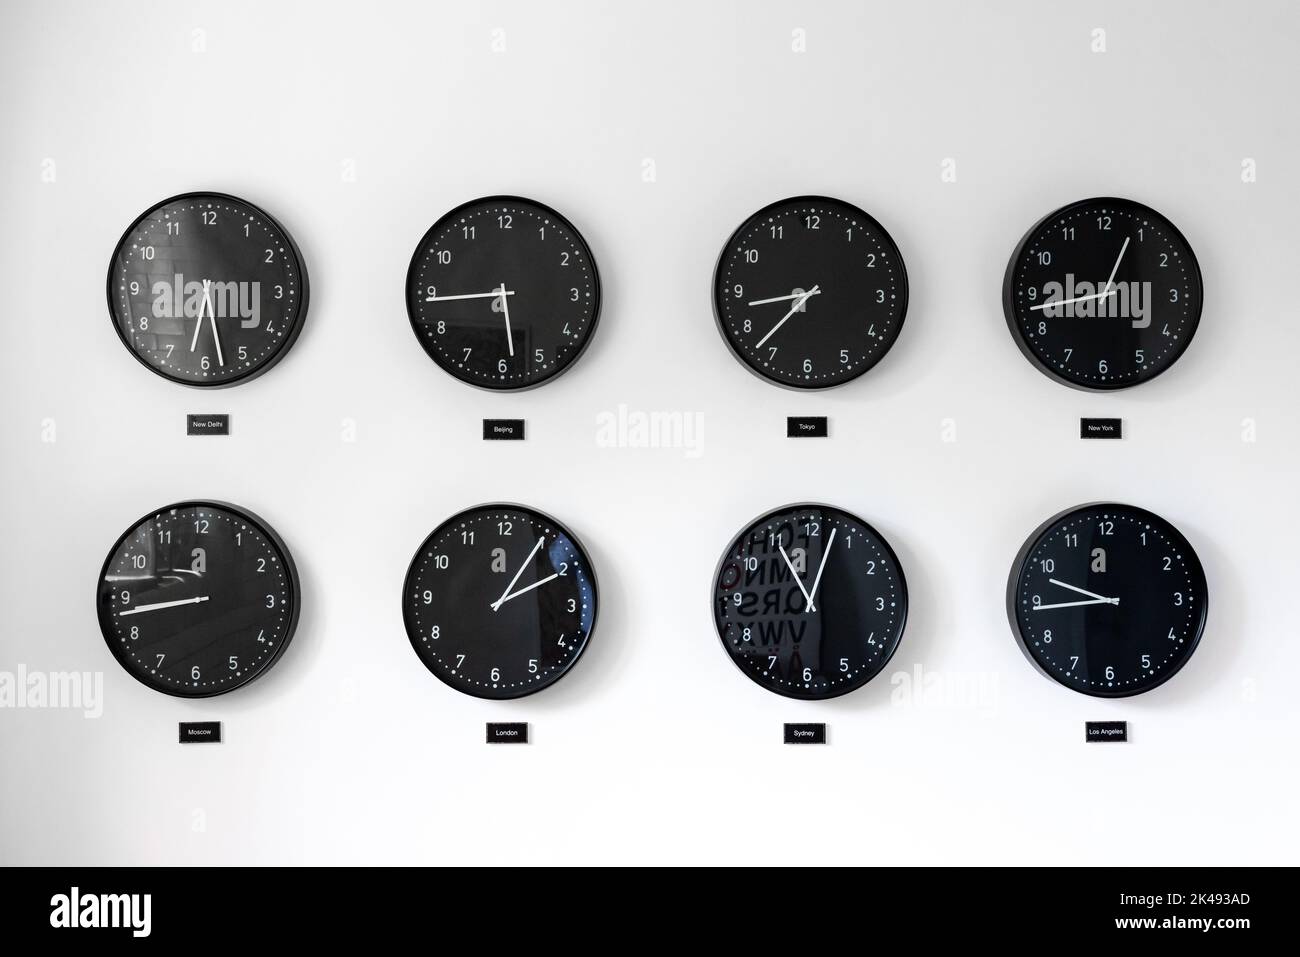 Different times al around the world including Great Britain, Russia and Honk Kong. Eight clocks on wall showing world time zones. Stock Photo